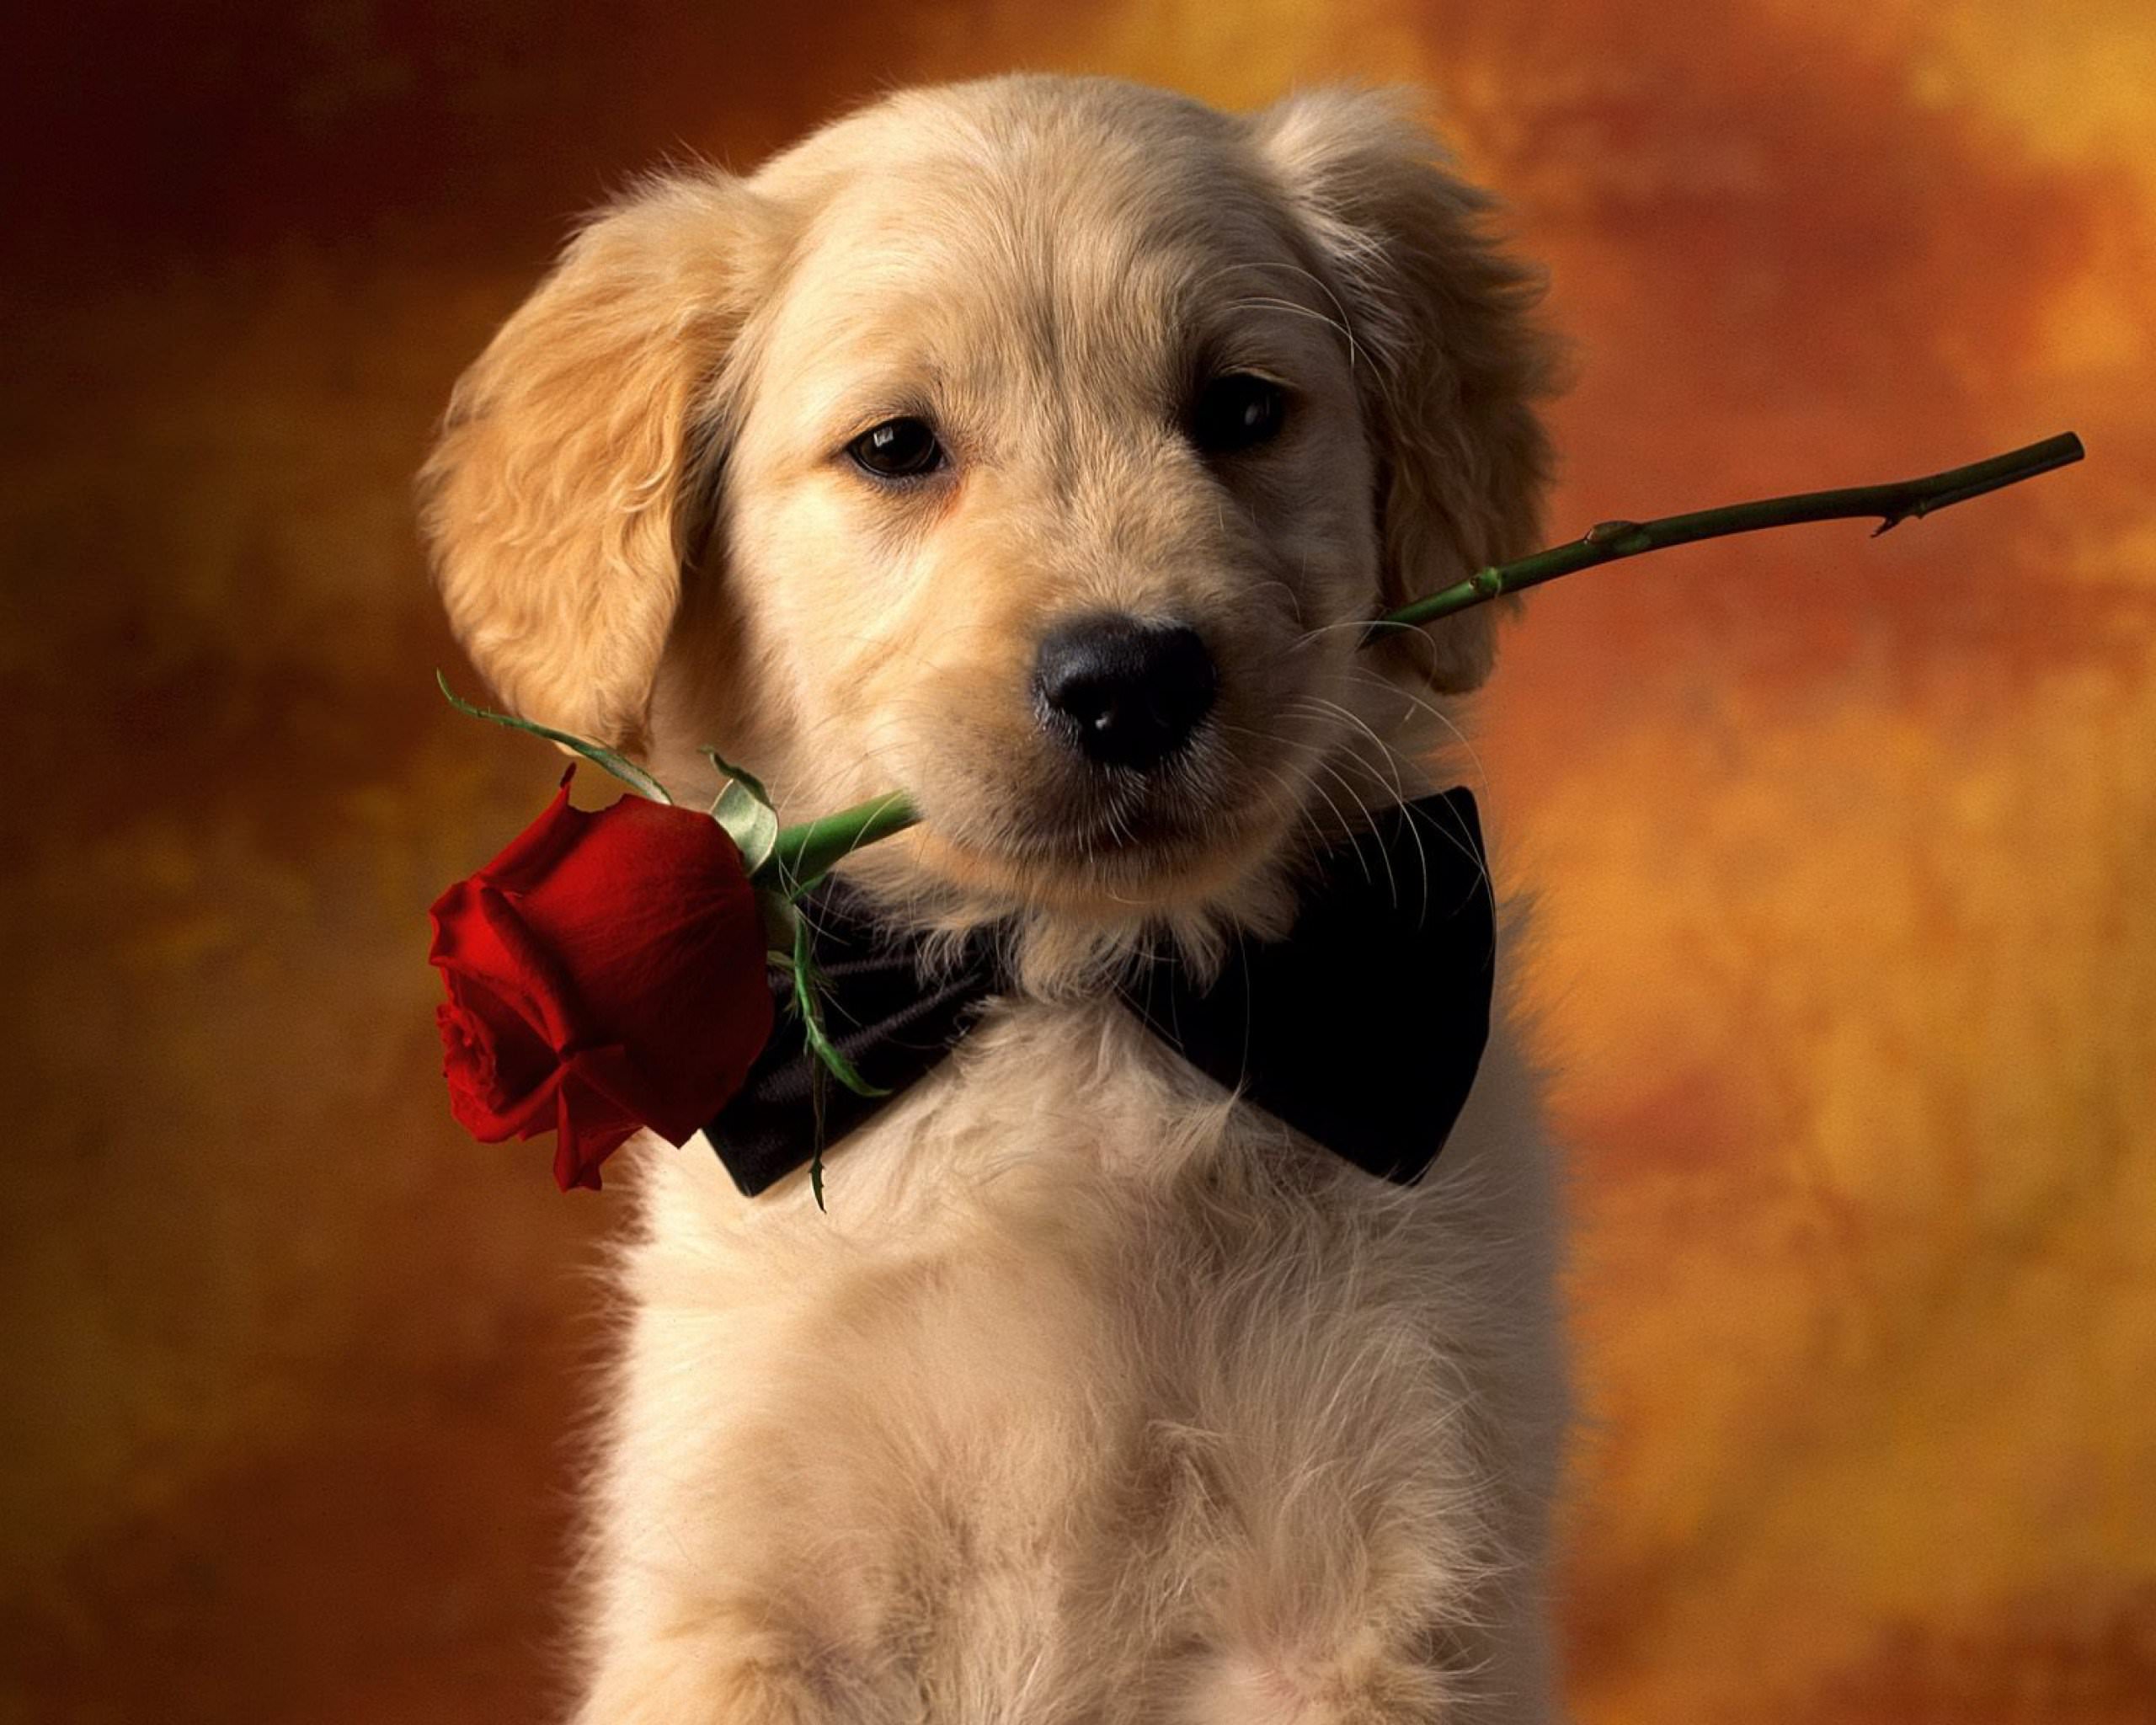 puppy pet with red rose image